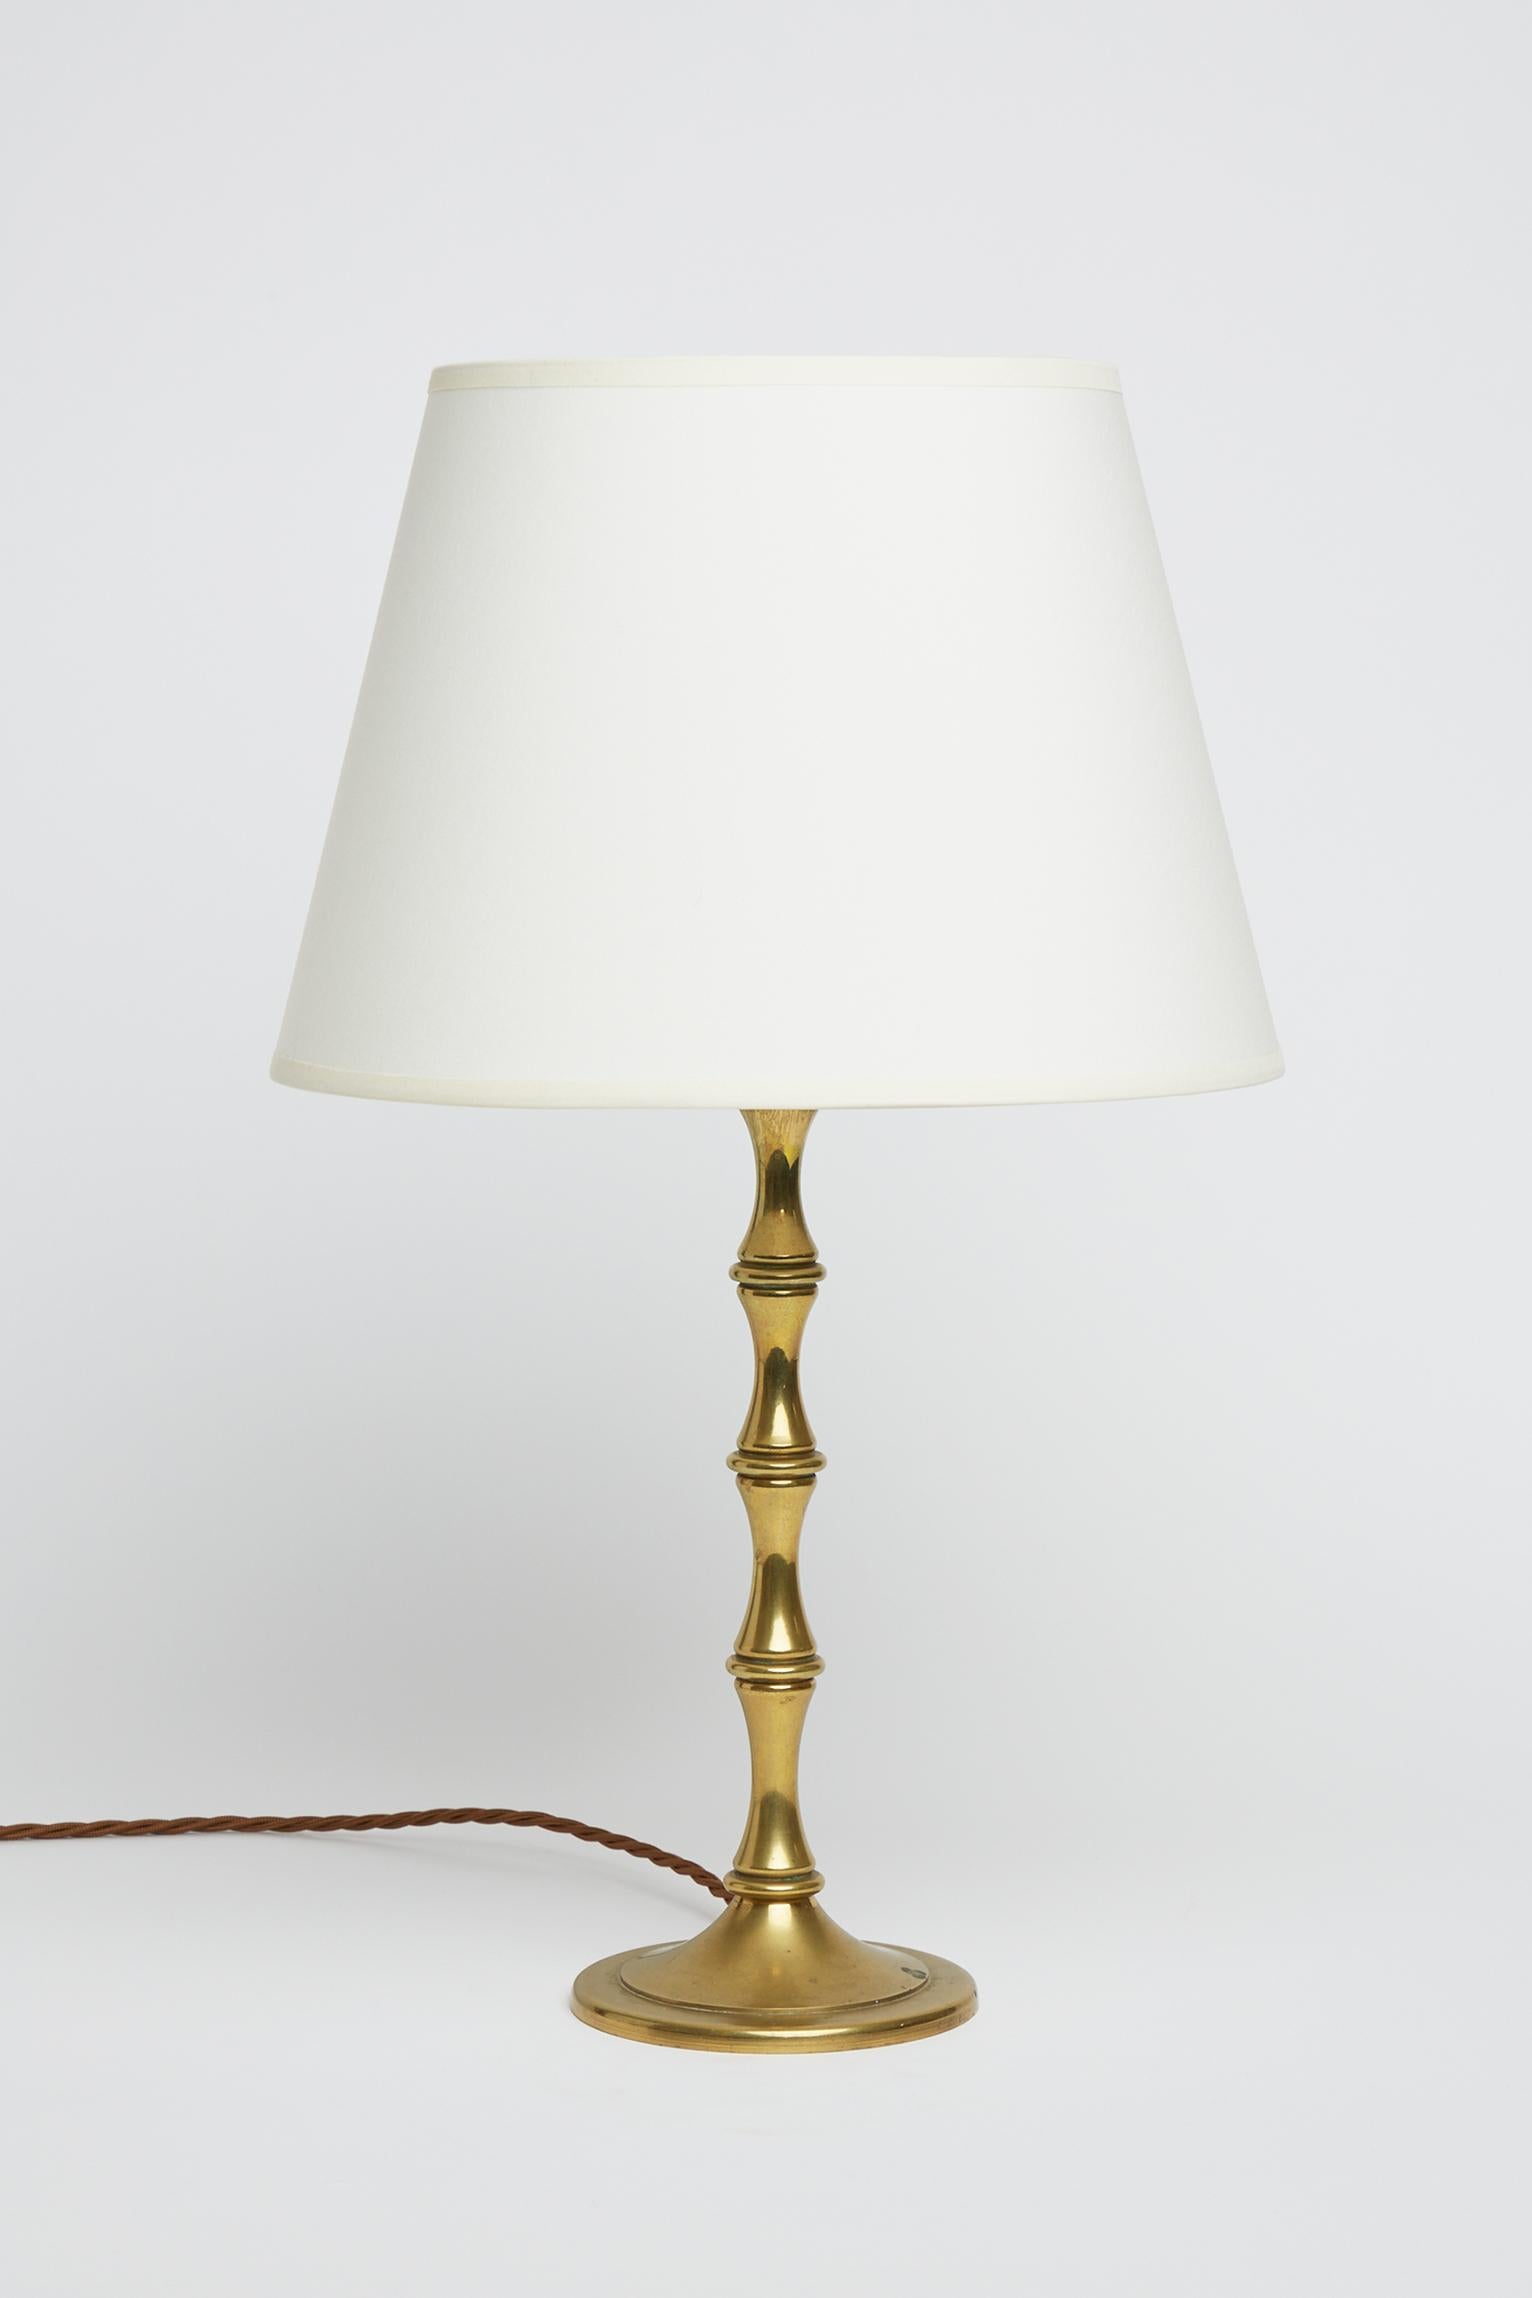 A brass stylised bamboo table lamp.
France, third quarter of the 20th century.
Measures: With the shade: 50 cm high by 34 cm diameter.
Lamp base only: 34 cm high by 12.5 cm diameter.